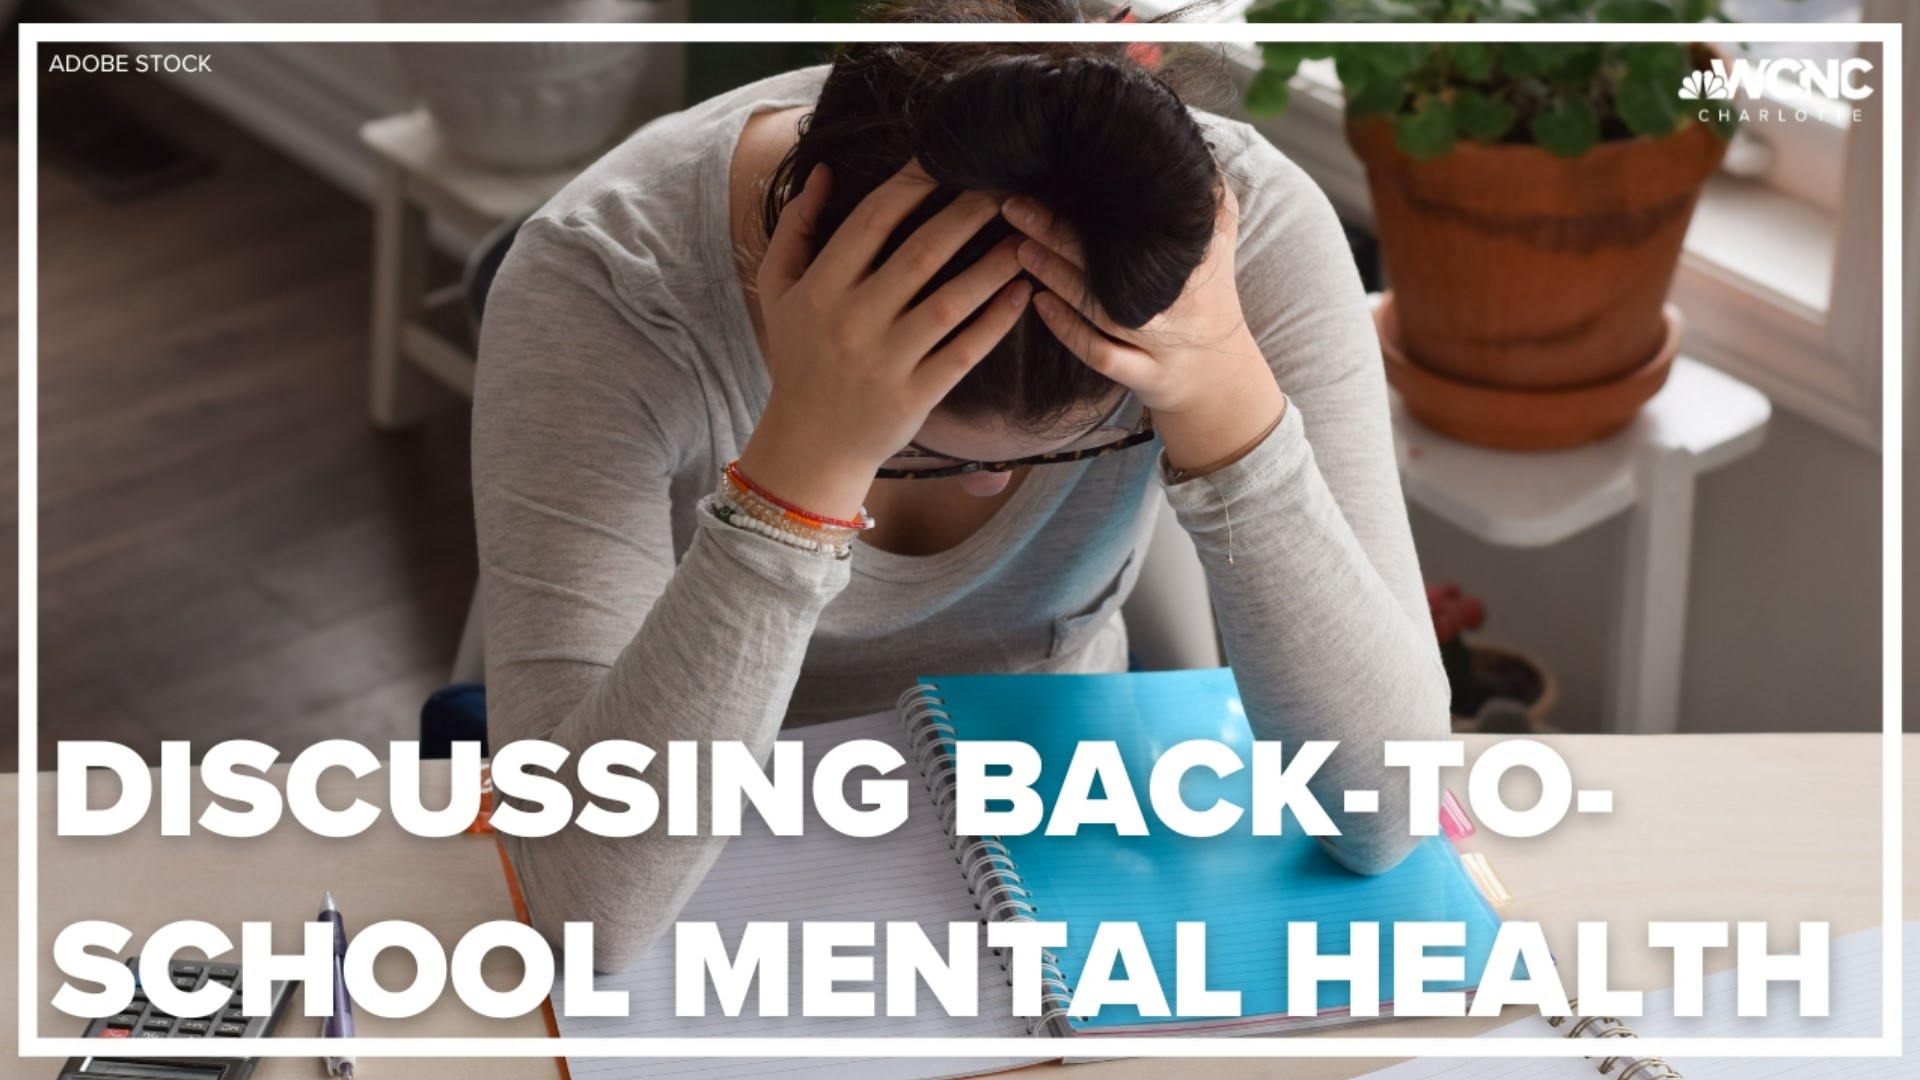 New research shows school is a top trigger for depression and anxiety in teens.